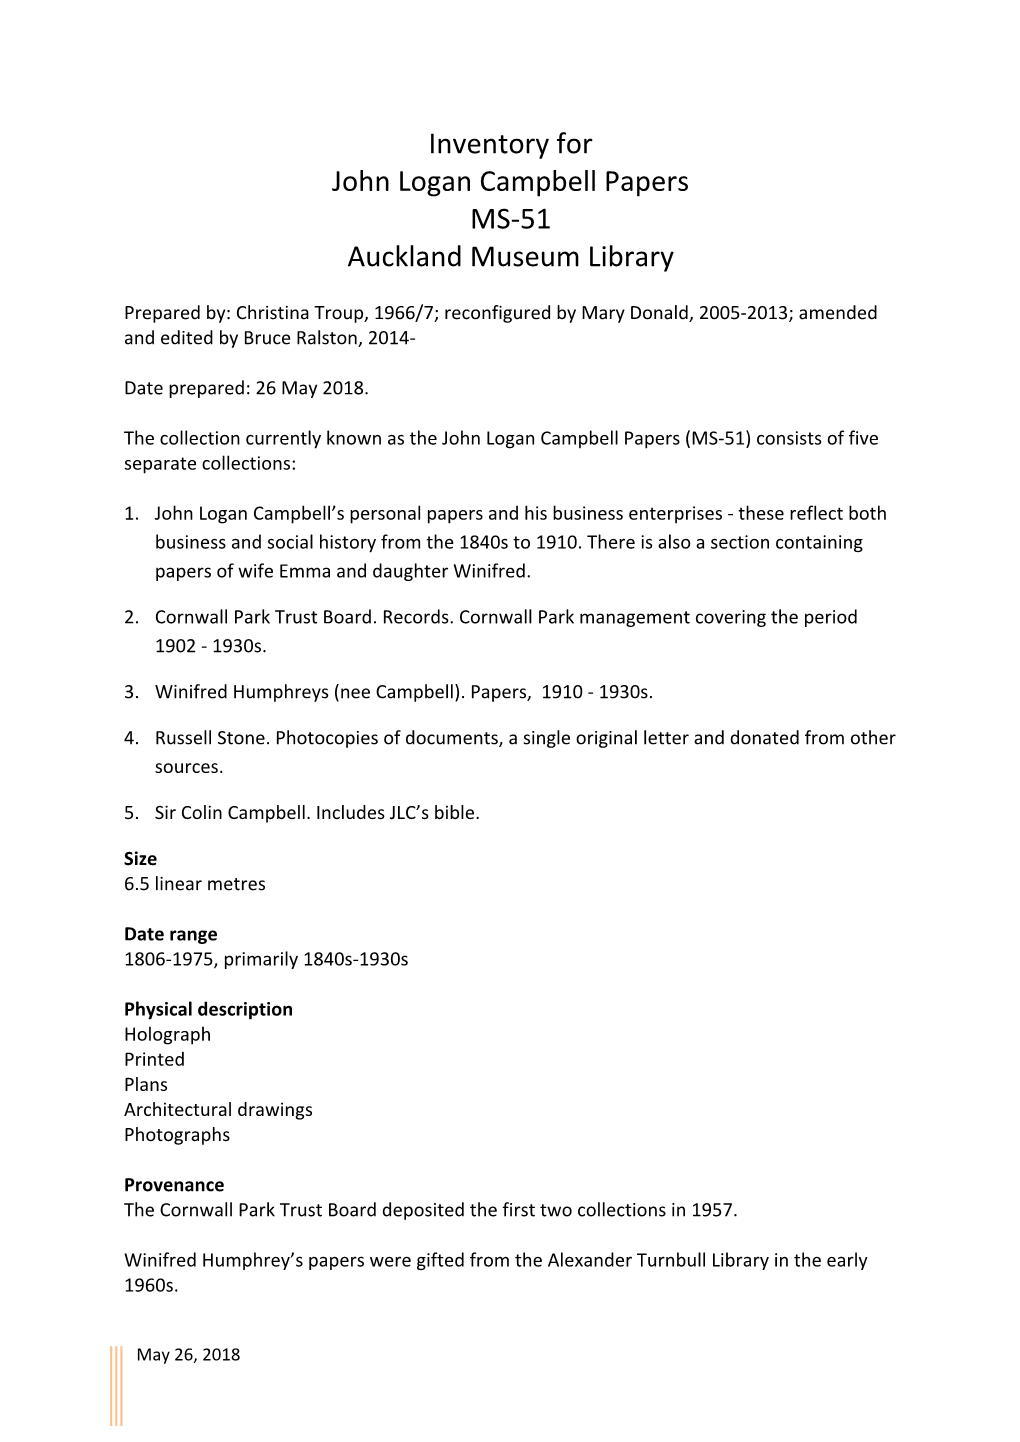 Inventory for John Logan Campbell Papers MS-51 Auckland Museum